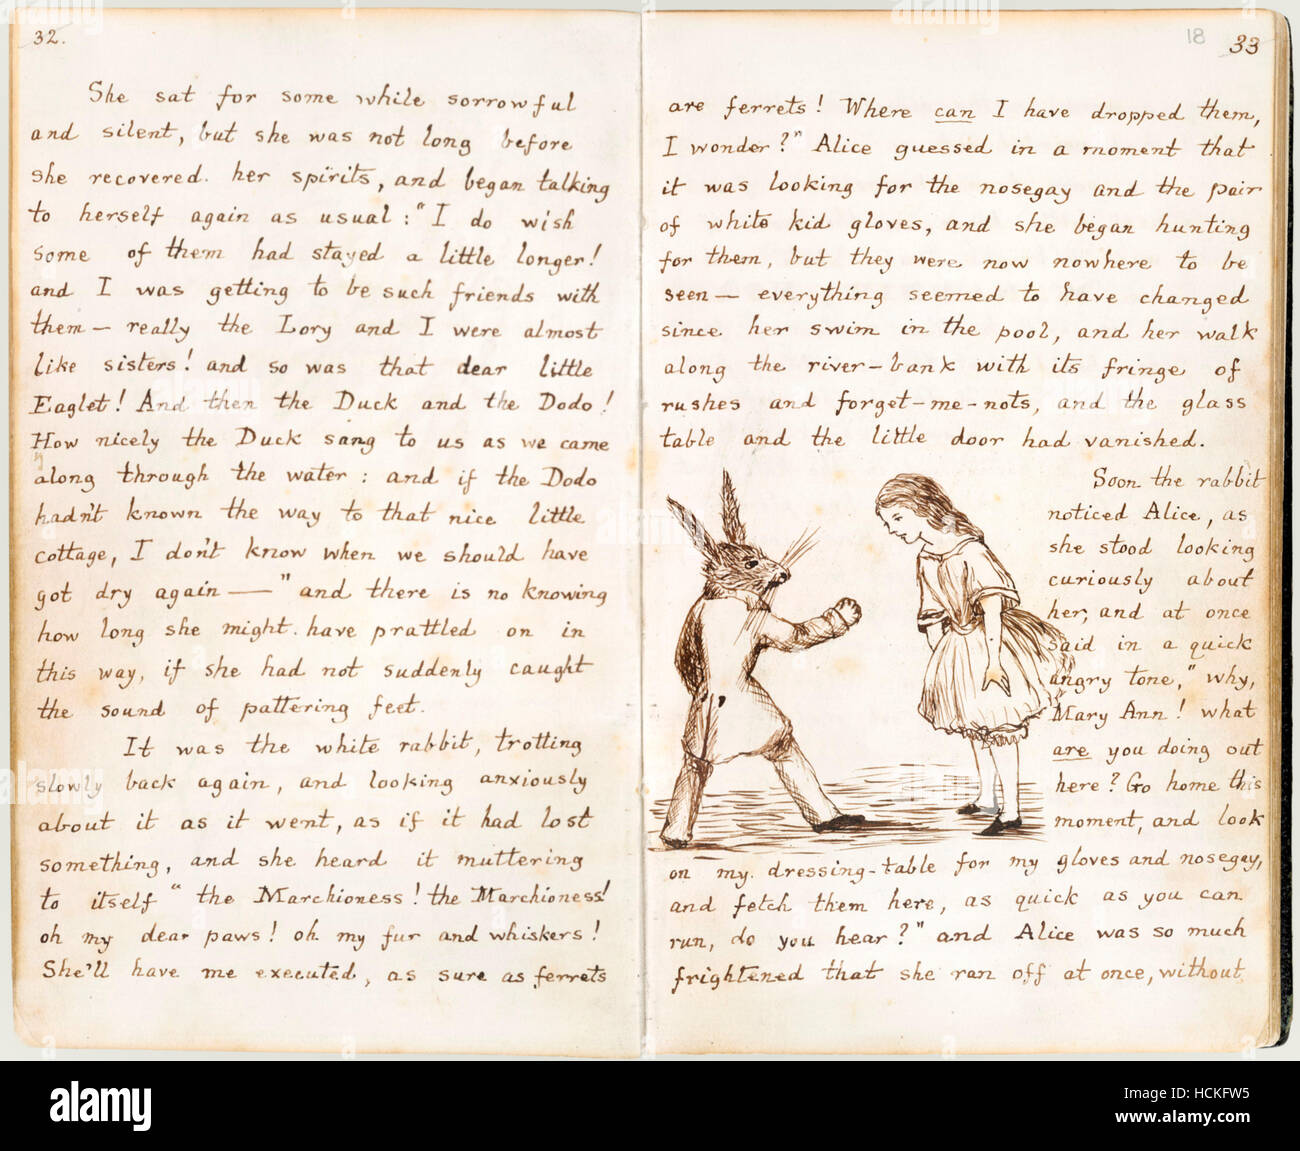 The rabbit searches for his nosegay and white kid gloves, from the original manuscript of 'Alice's Adventures Under Ground' by Charles Lutwidge Dodgson (1832-1898) given to Alice Liddell in November 1864 and published under the title ‘Alice's Adventures in Wonderland’ in 1865 under the pen-name Lewis Carroll. Stock Photo